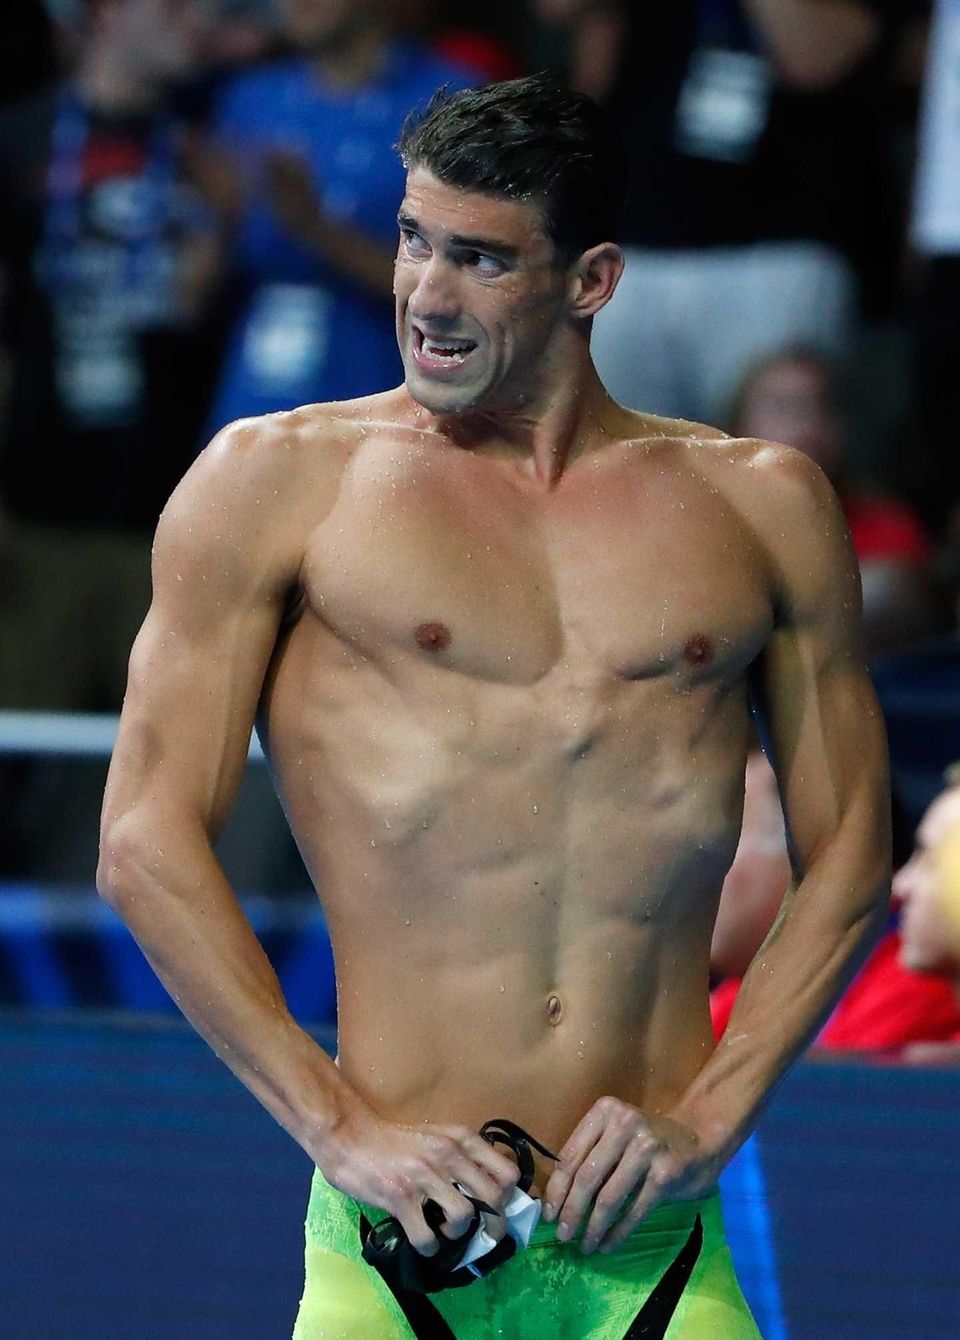 Michael Phelps at the U.S. Olympic swimming trials am New York